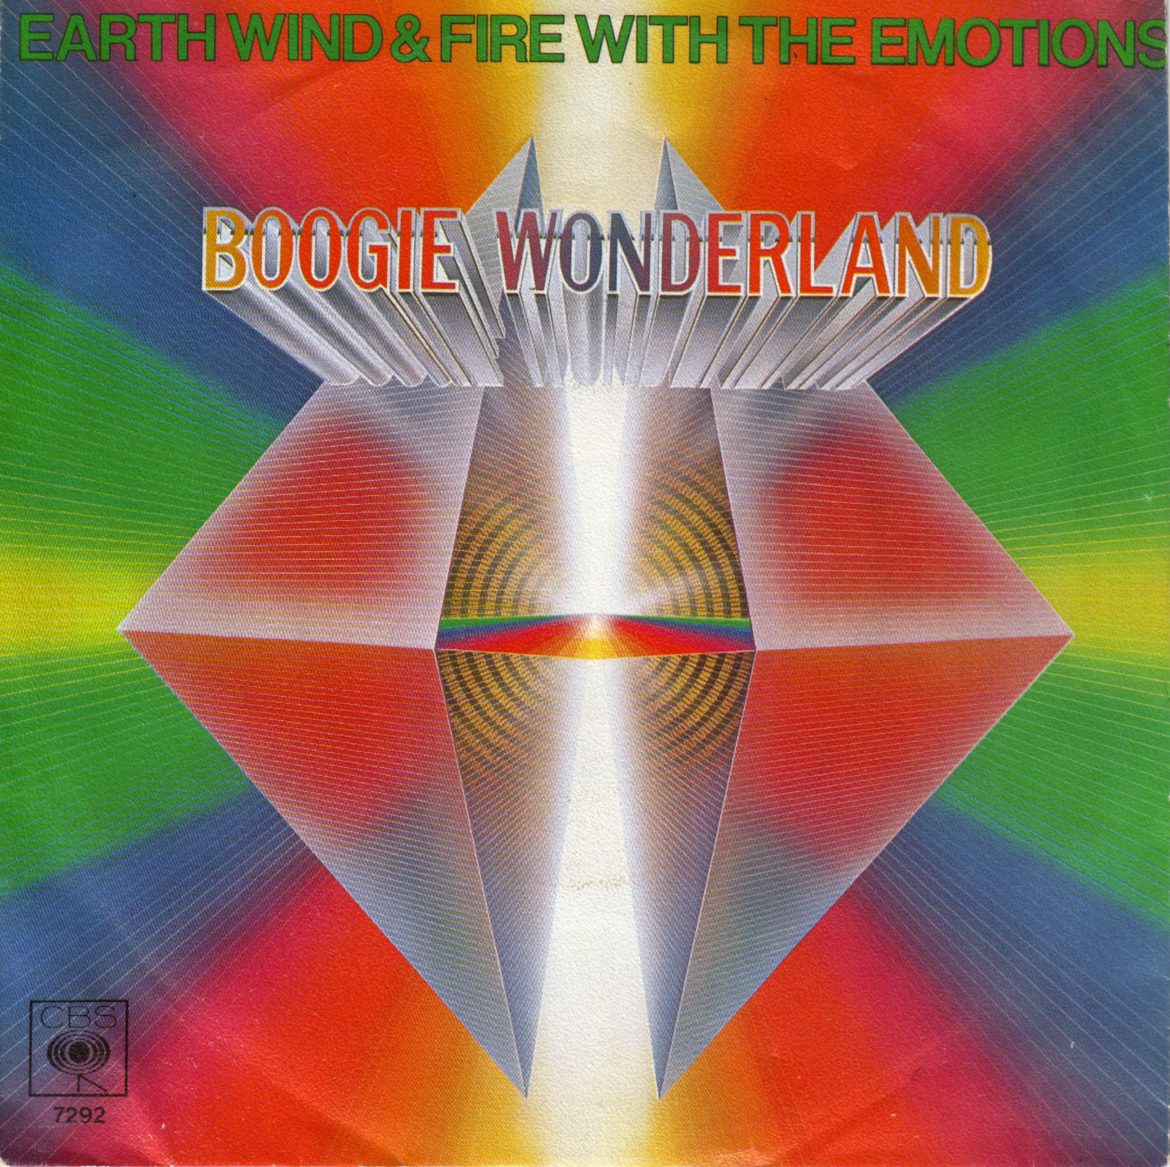 Earth, Wind & Fire With The Emotions - Boogie Wonderland